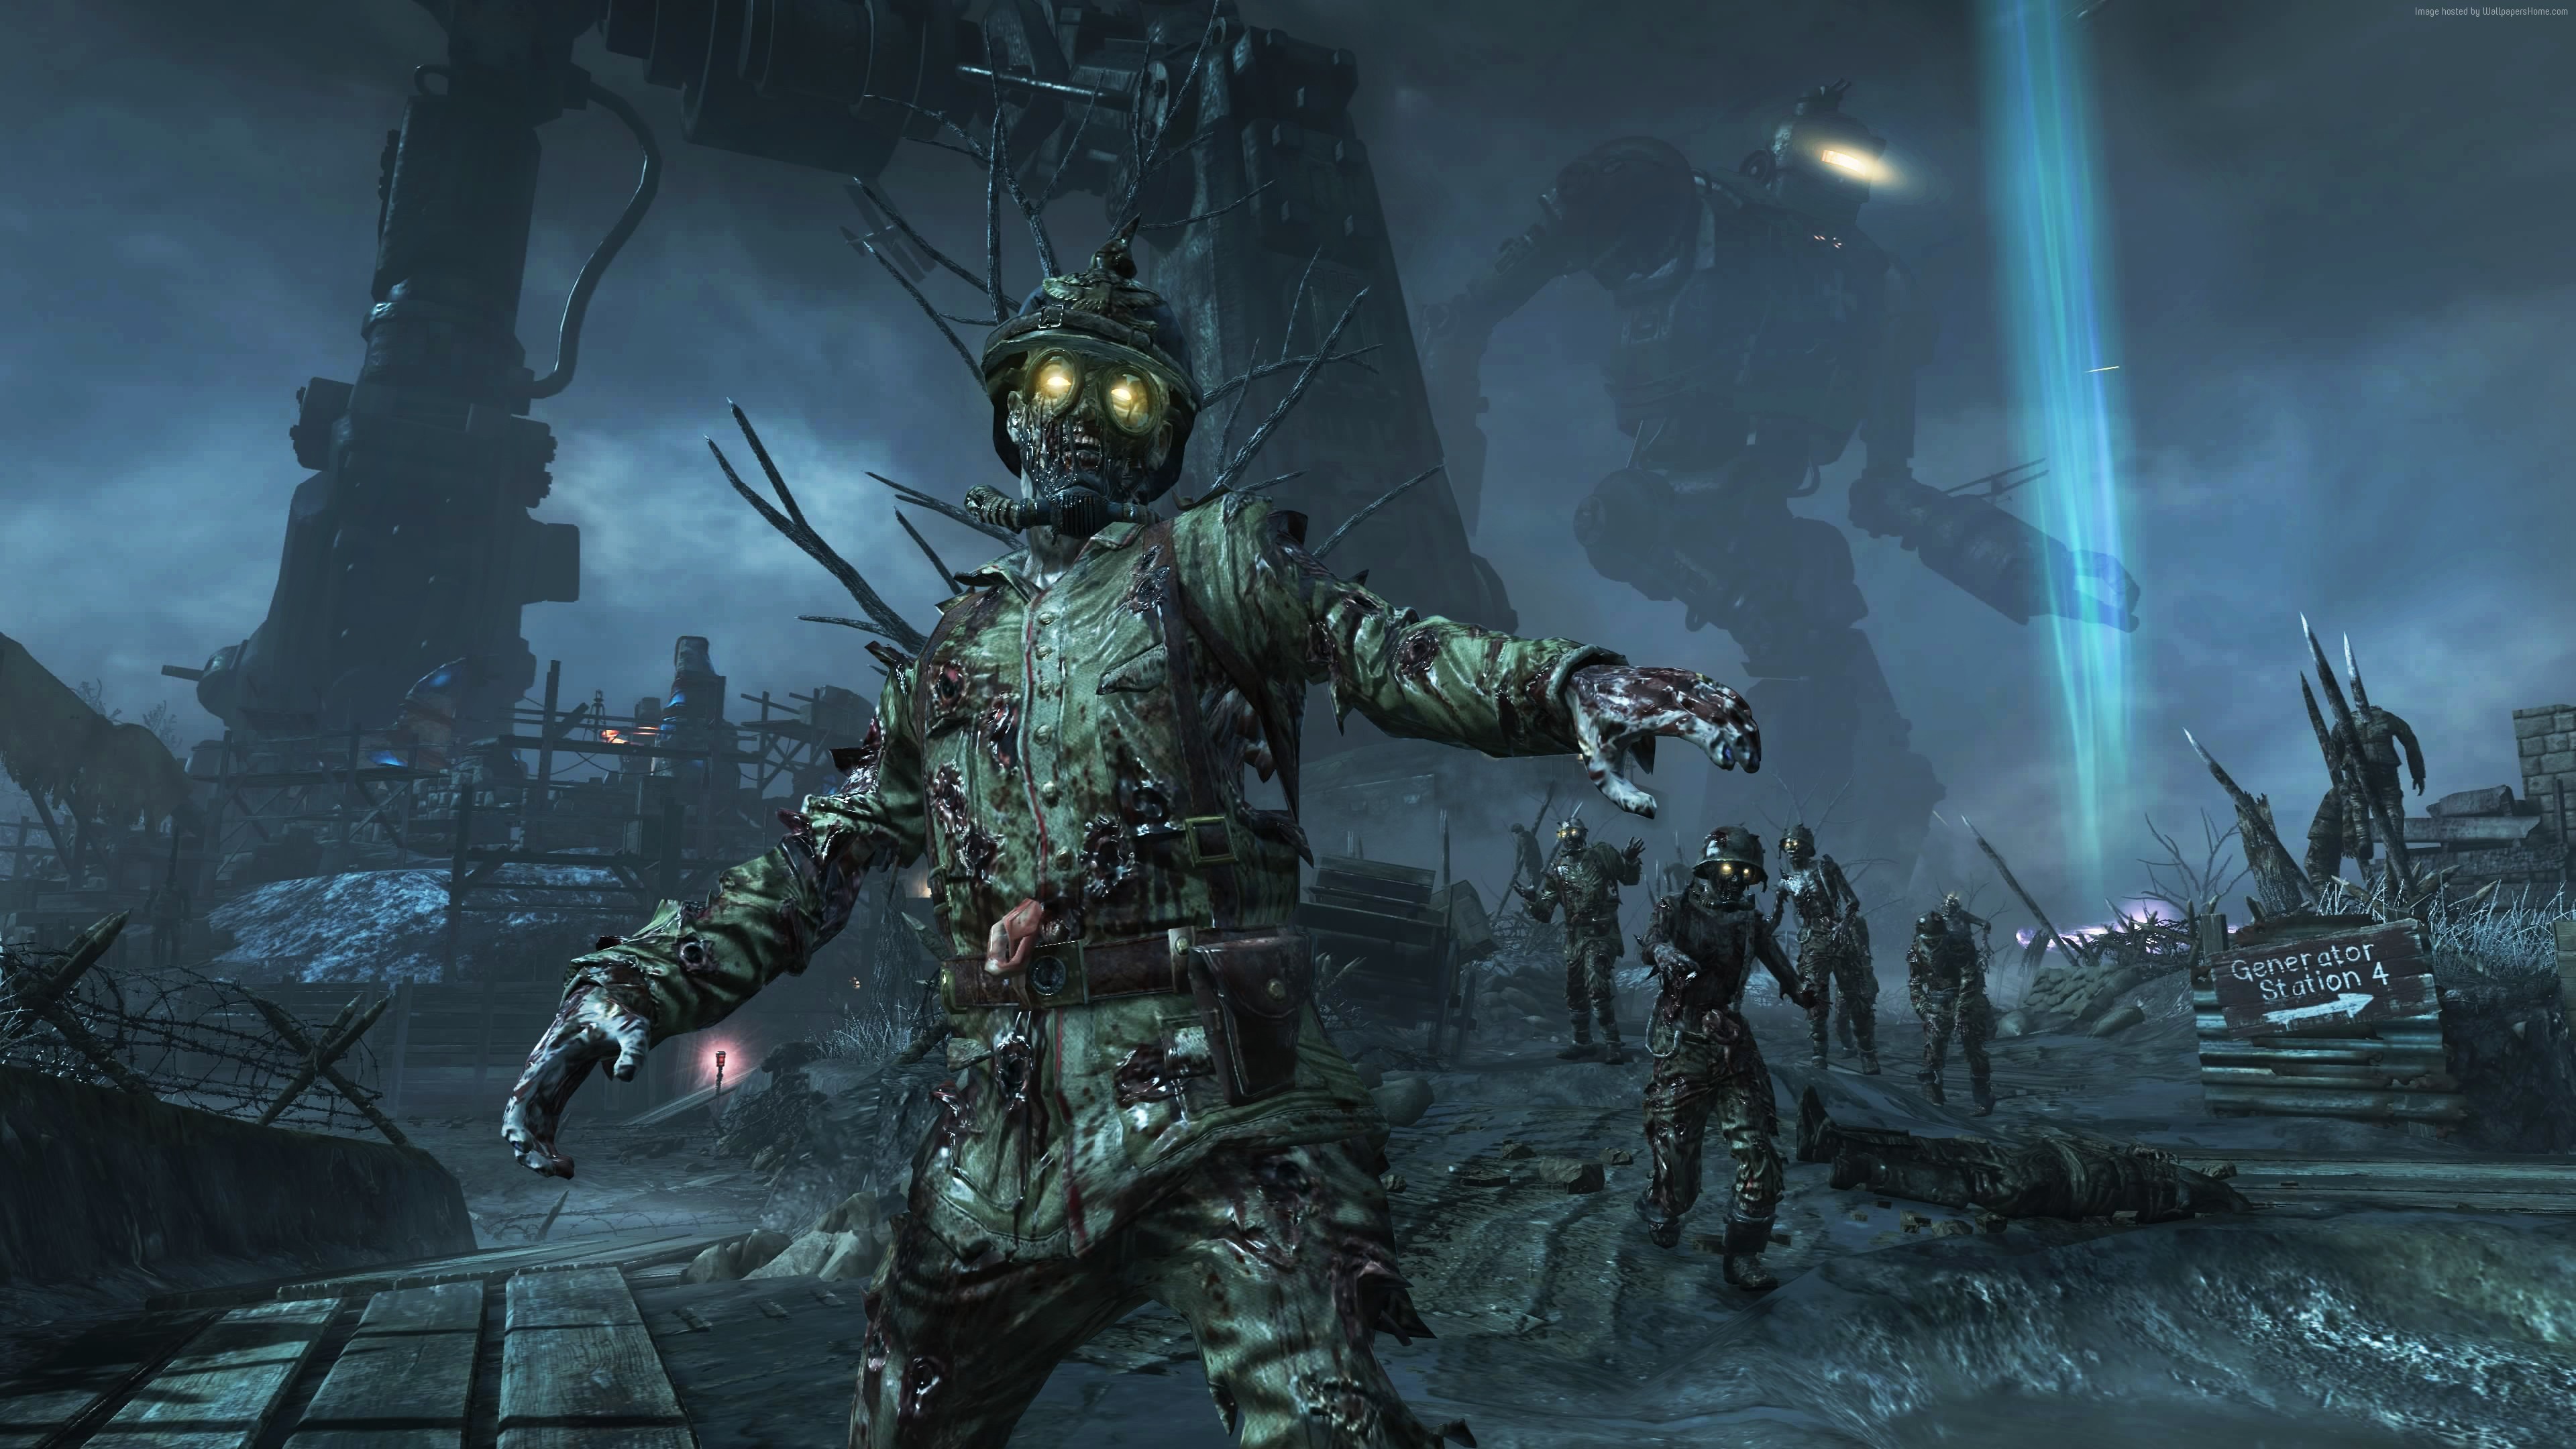 3840x2160, Full Hd For Call Of Duty Zombies Wallpaper - Call Of Duty Zombie - HD Wallpaper 